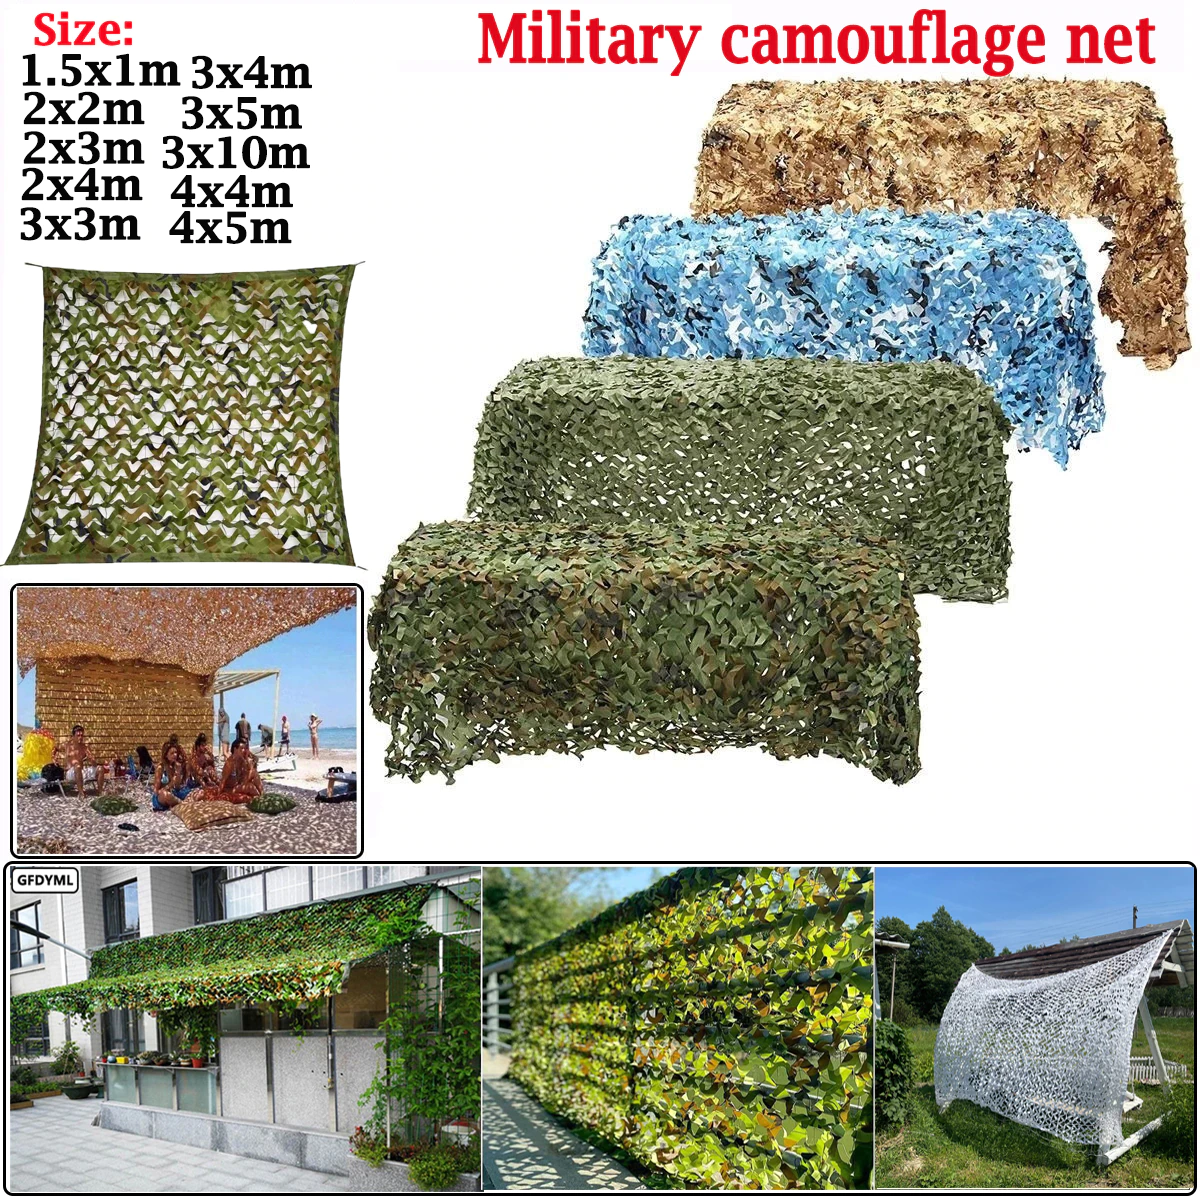 Cheap Goat Tents 4x5m3x10m 2x2 M Military Camouflage Net Camouflage Net Military Net Shade Net Hunting Garden Car Outdoor Camping Shade Tent